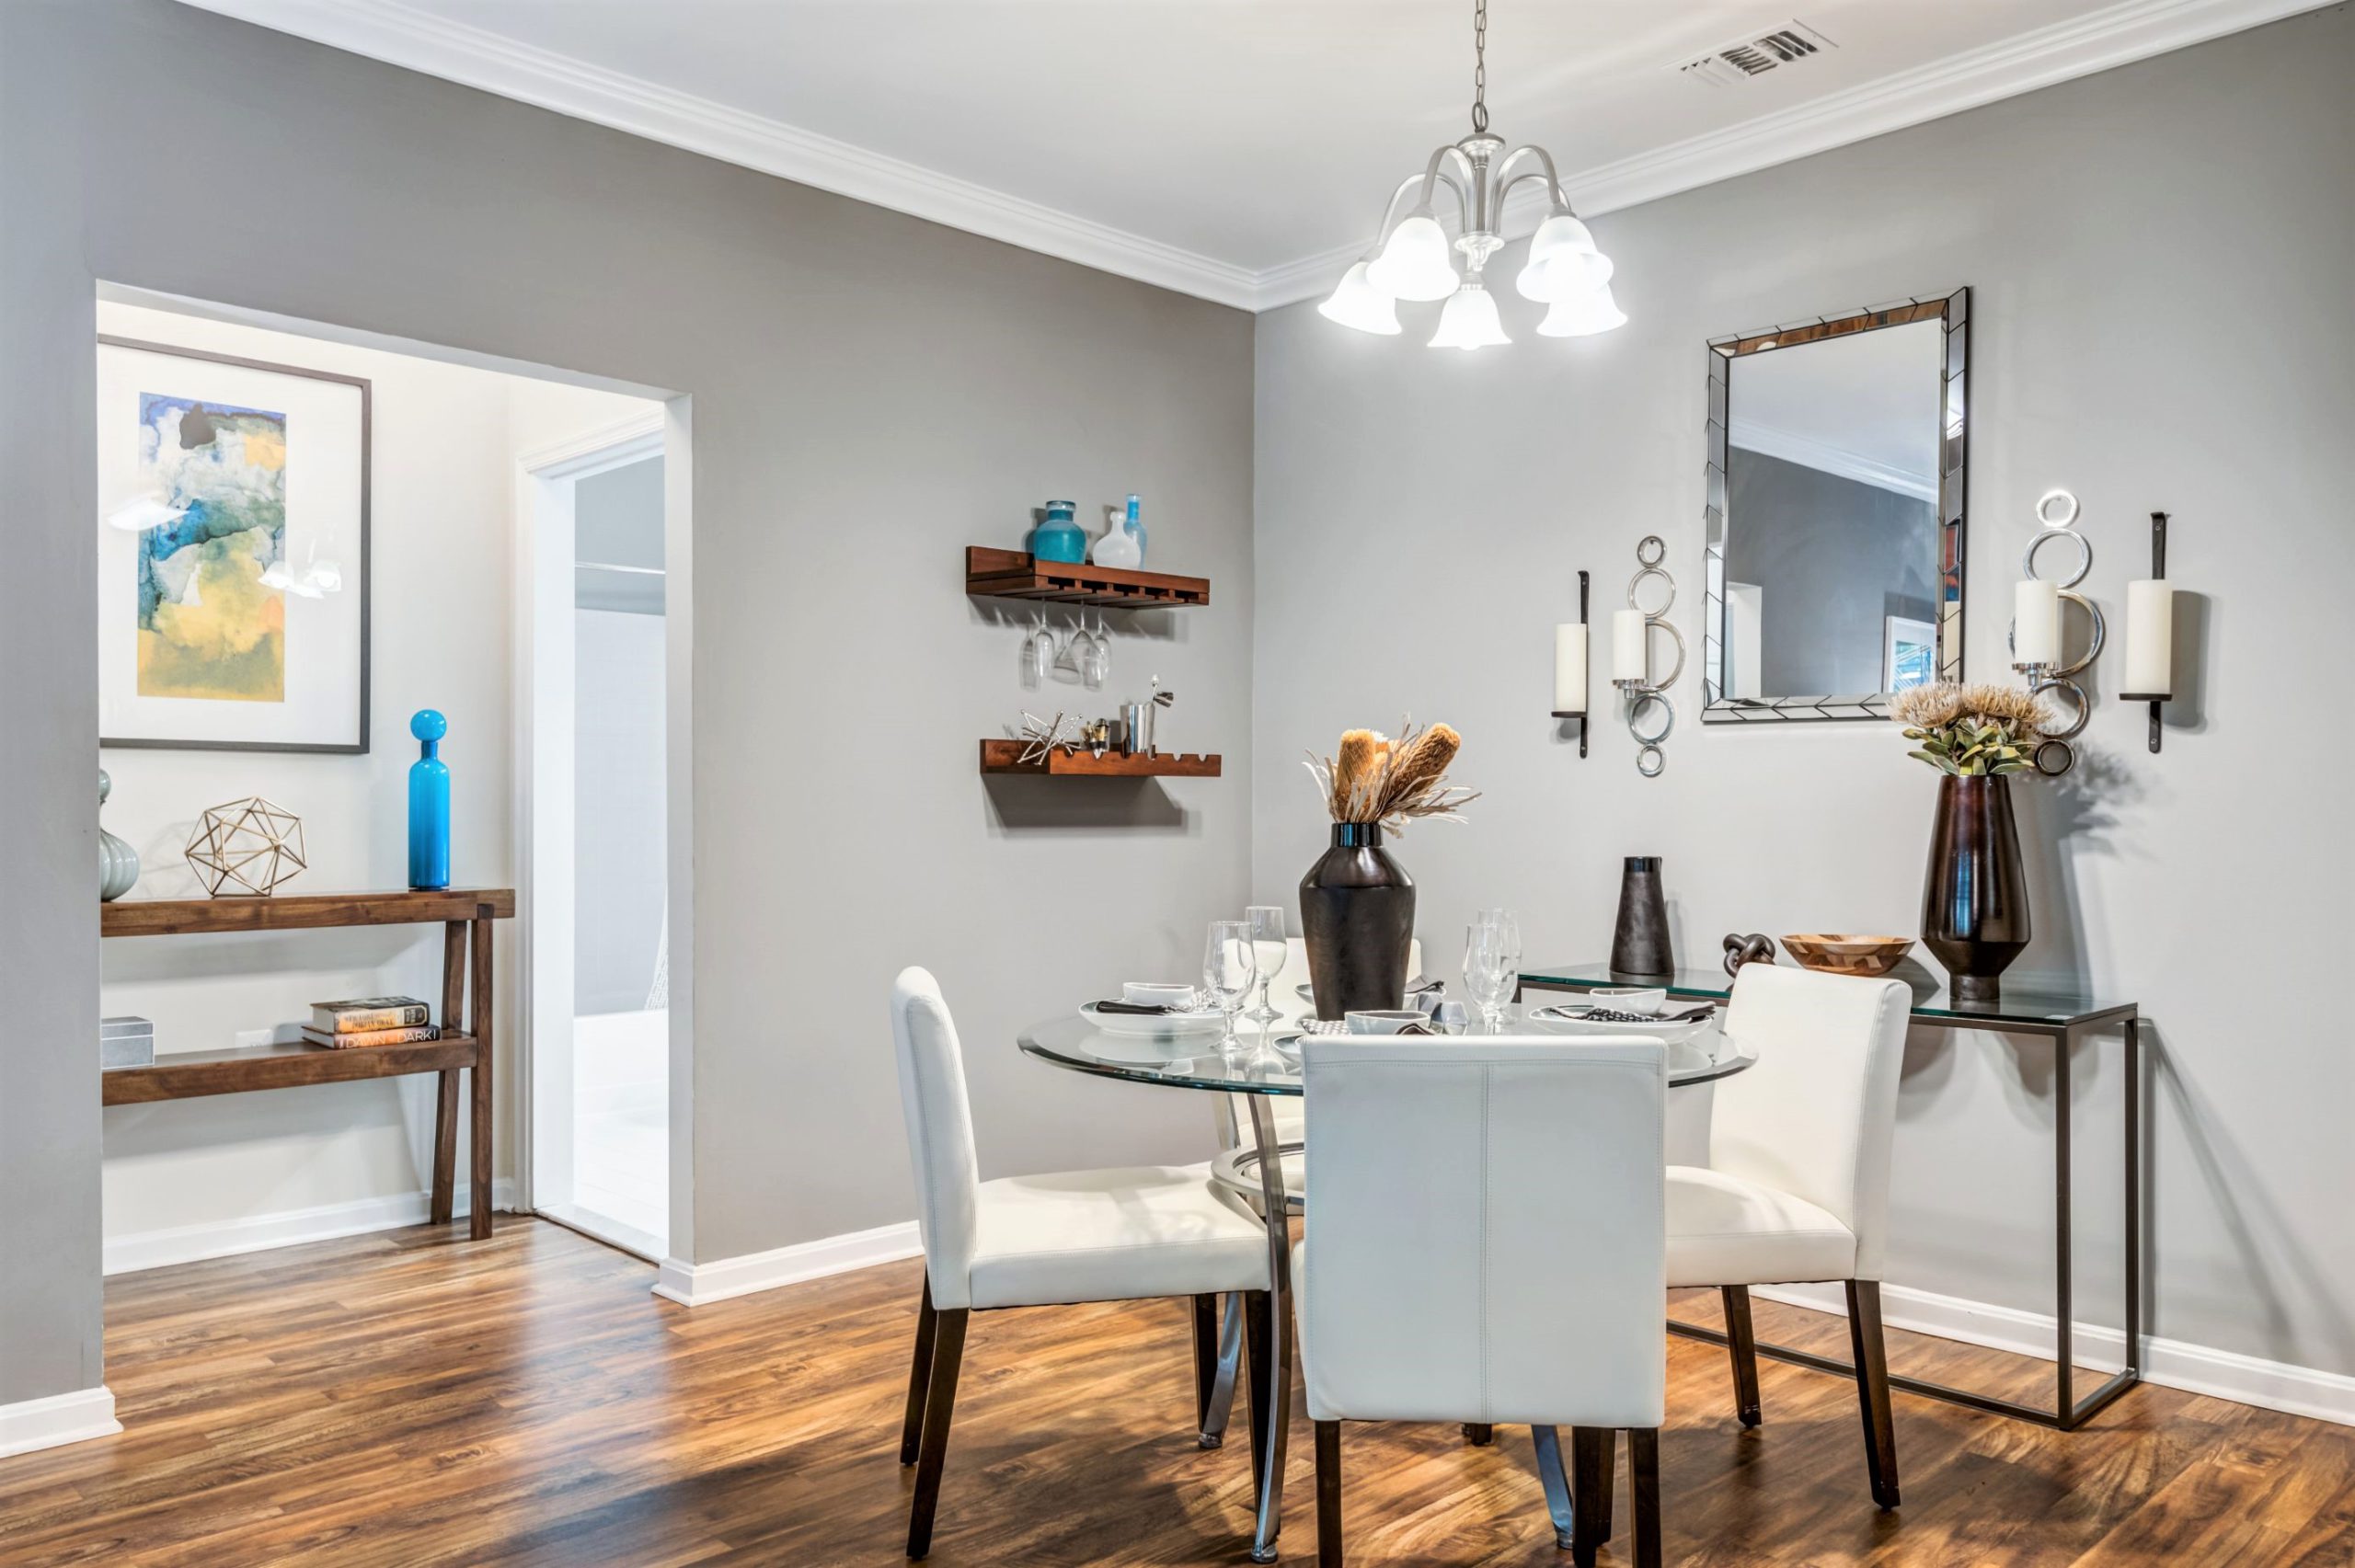 Dining space with table, chairs, and decorative wall art at jefferson arbors at broadlands luxury apartments in ashburn va